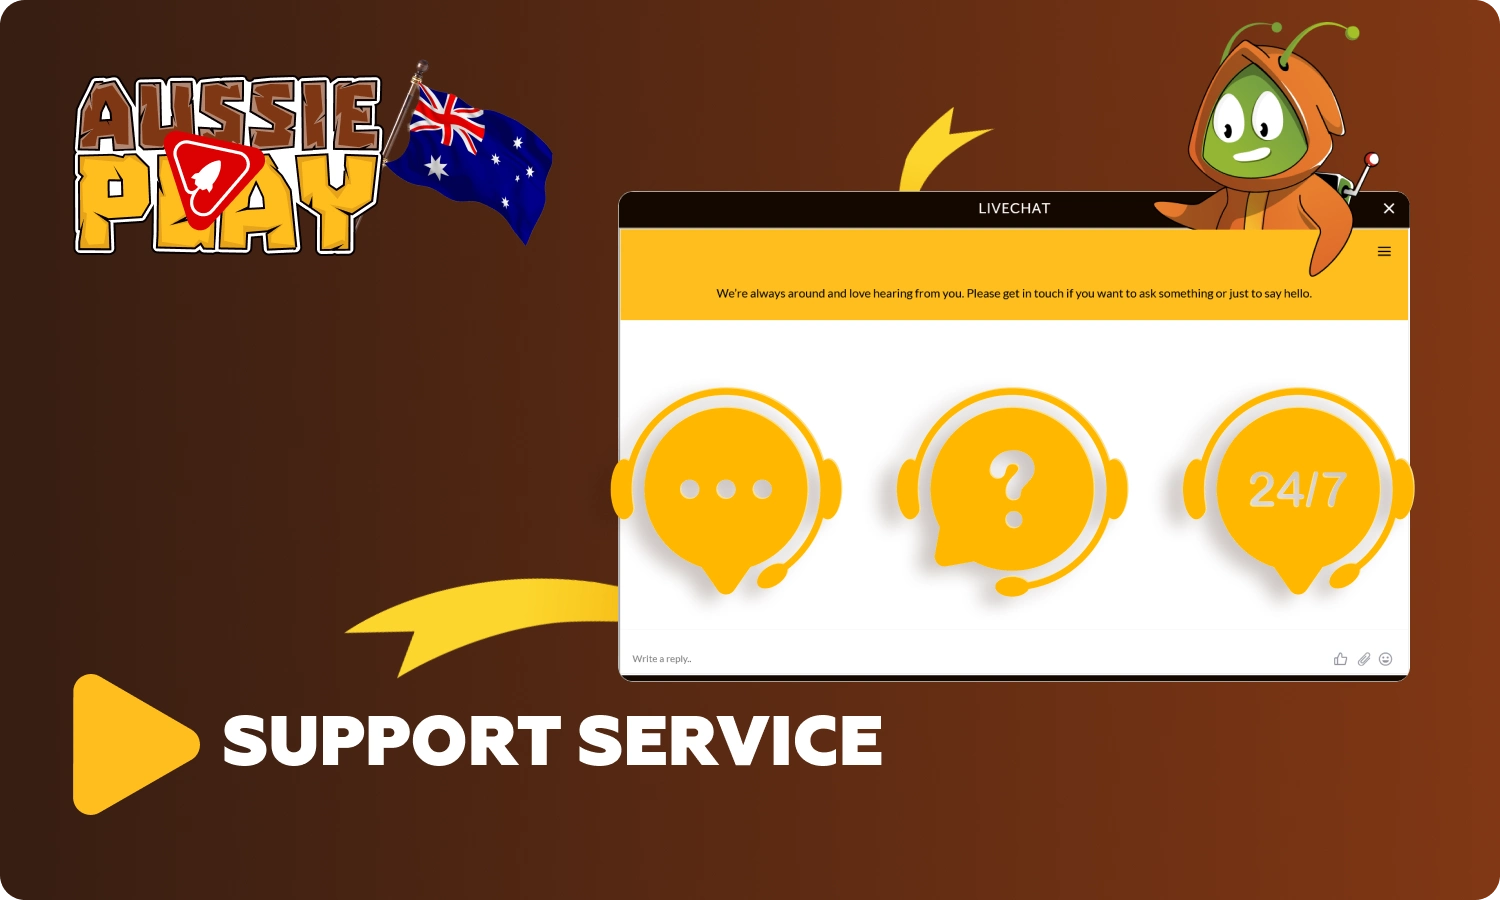 Aussie Play offers various contact options to assist players from Australia in case of questions or problems